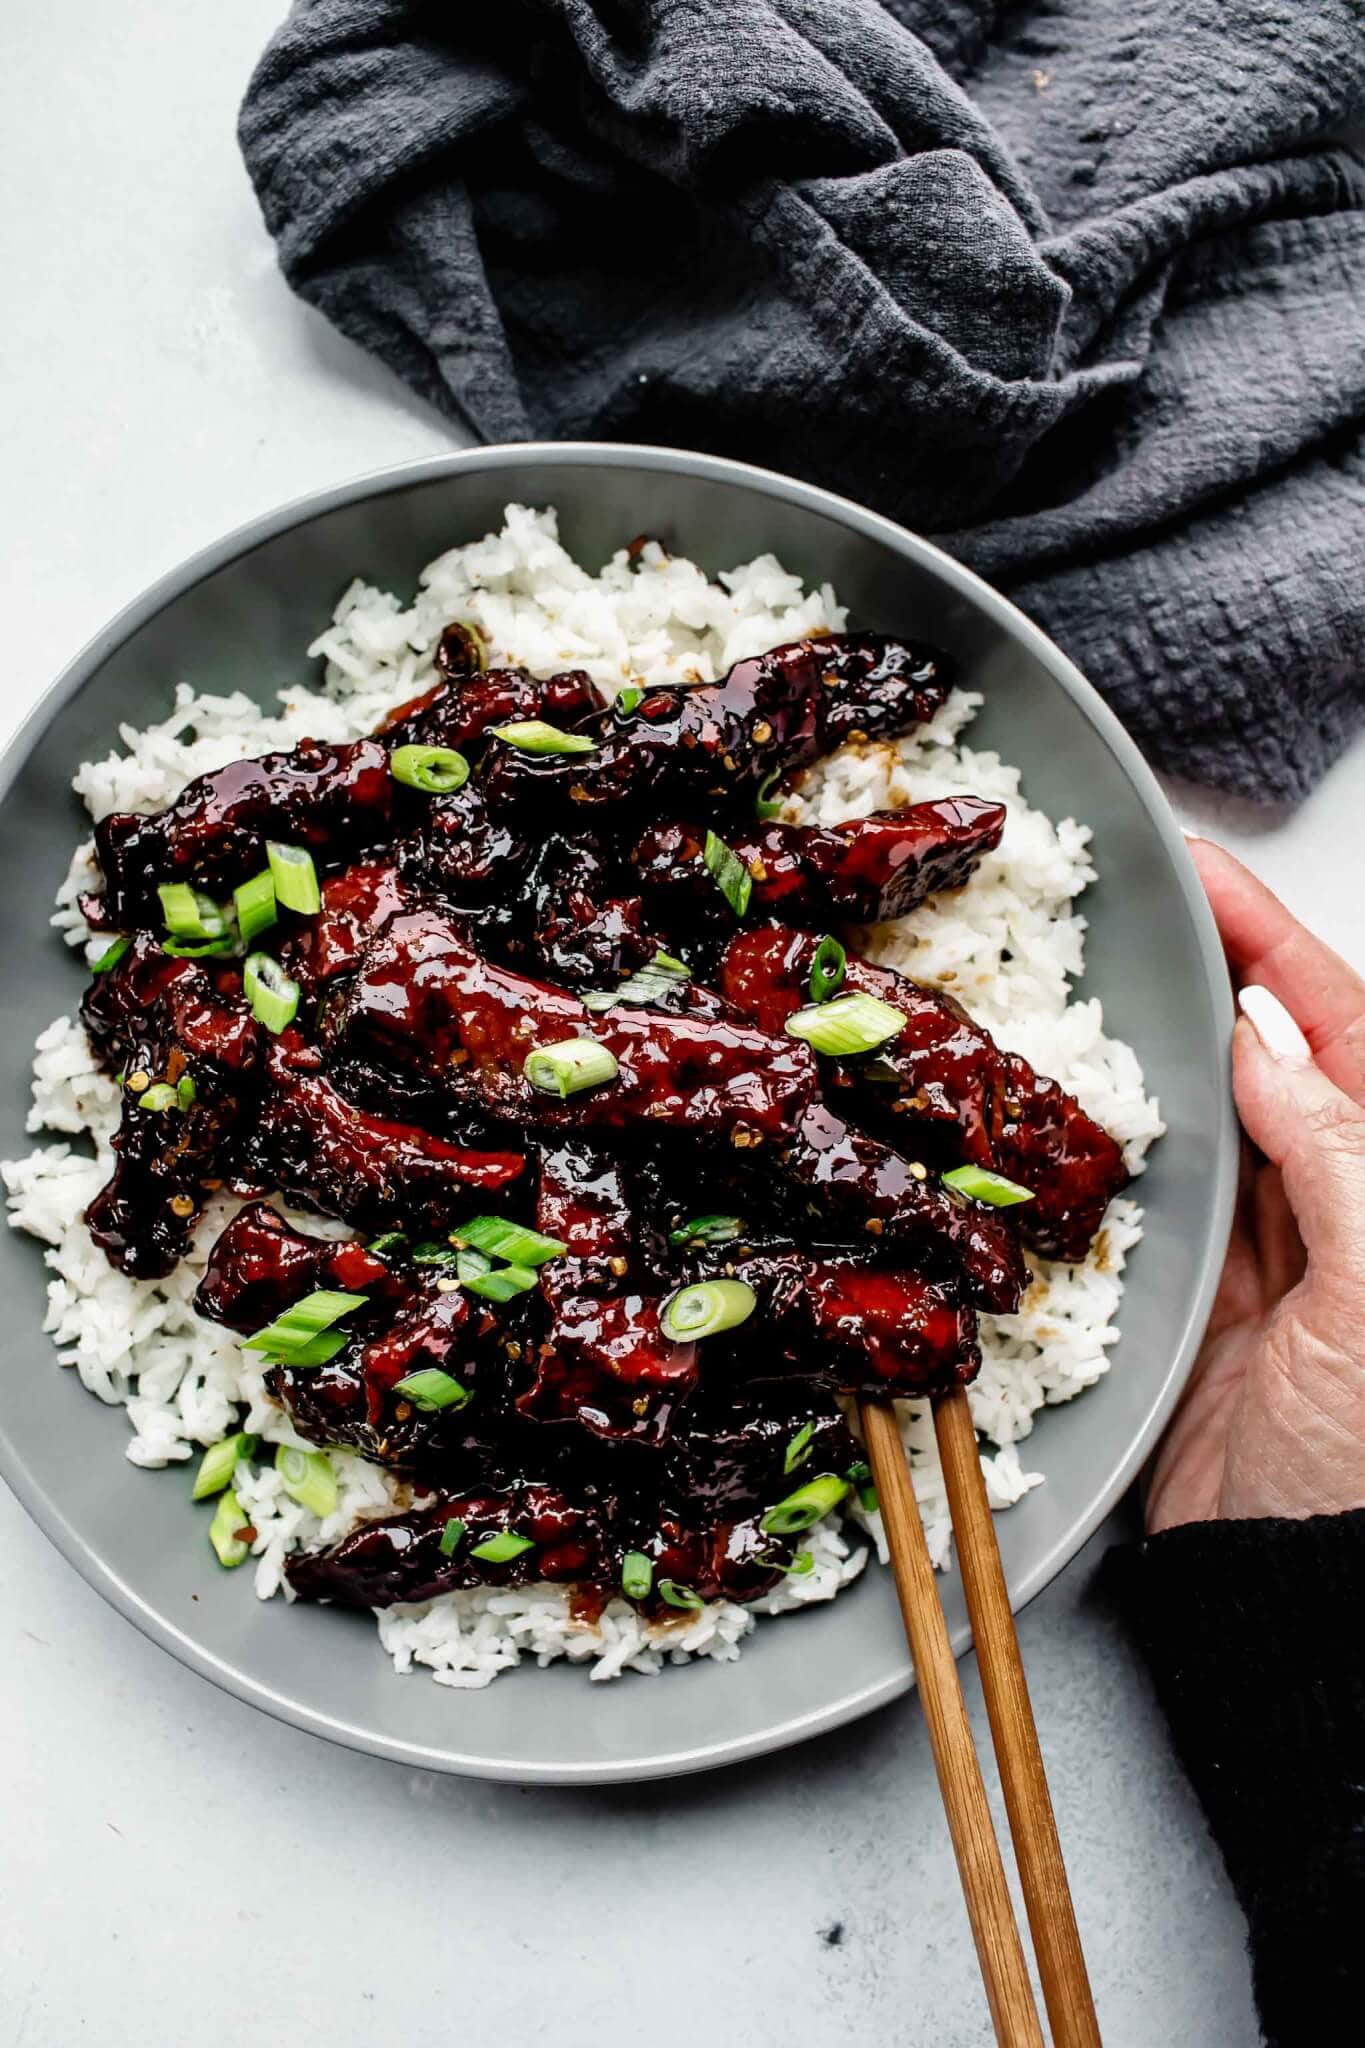 Hand holding bowl of mongolian beef.